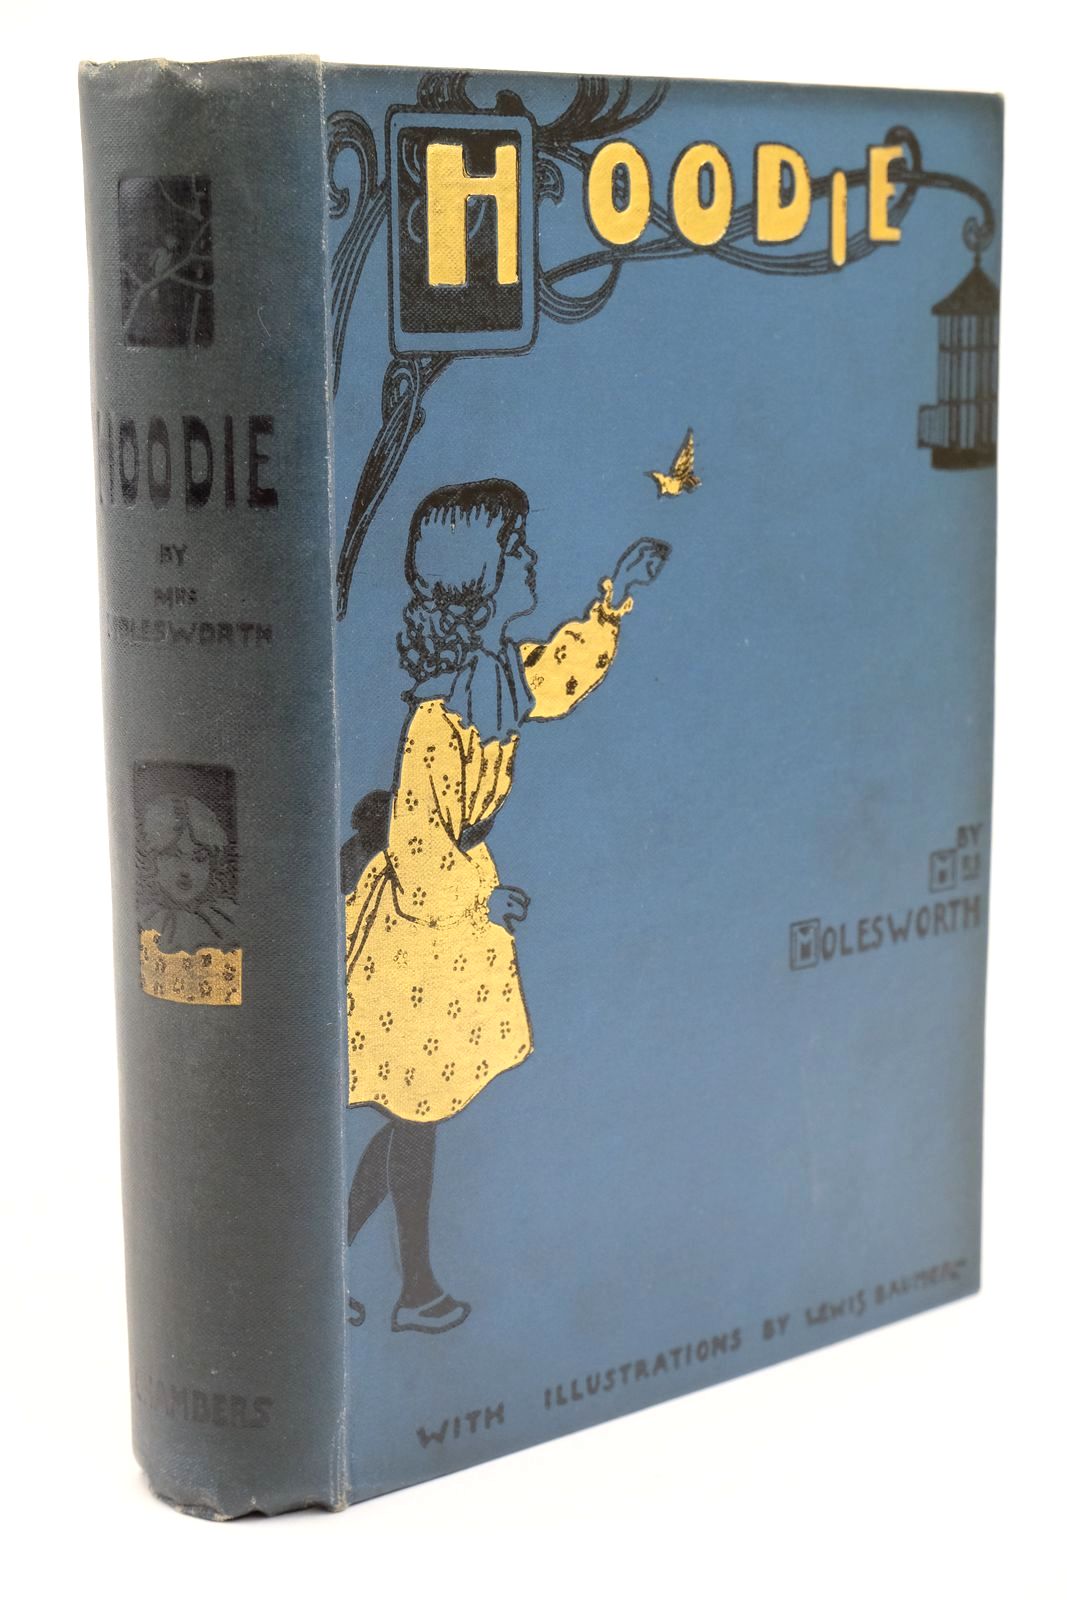 Photo of HOODIE written by Molesworth, Mrs. illustrated by Baumer, Lewis published by W. & R. Chambers Limited (STOCK CODE: 1322898)  for sale by Stella & Rose's Books